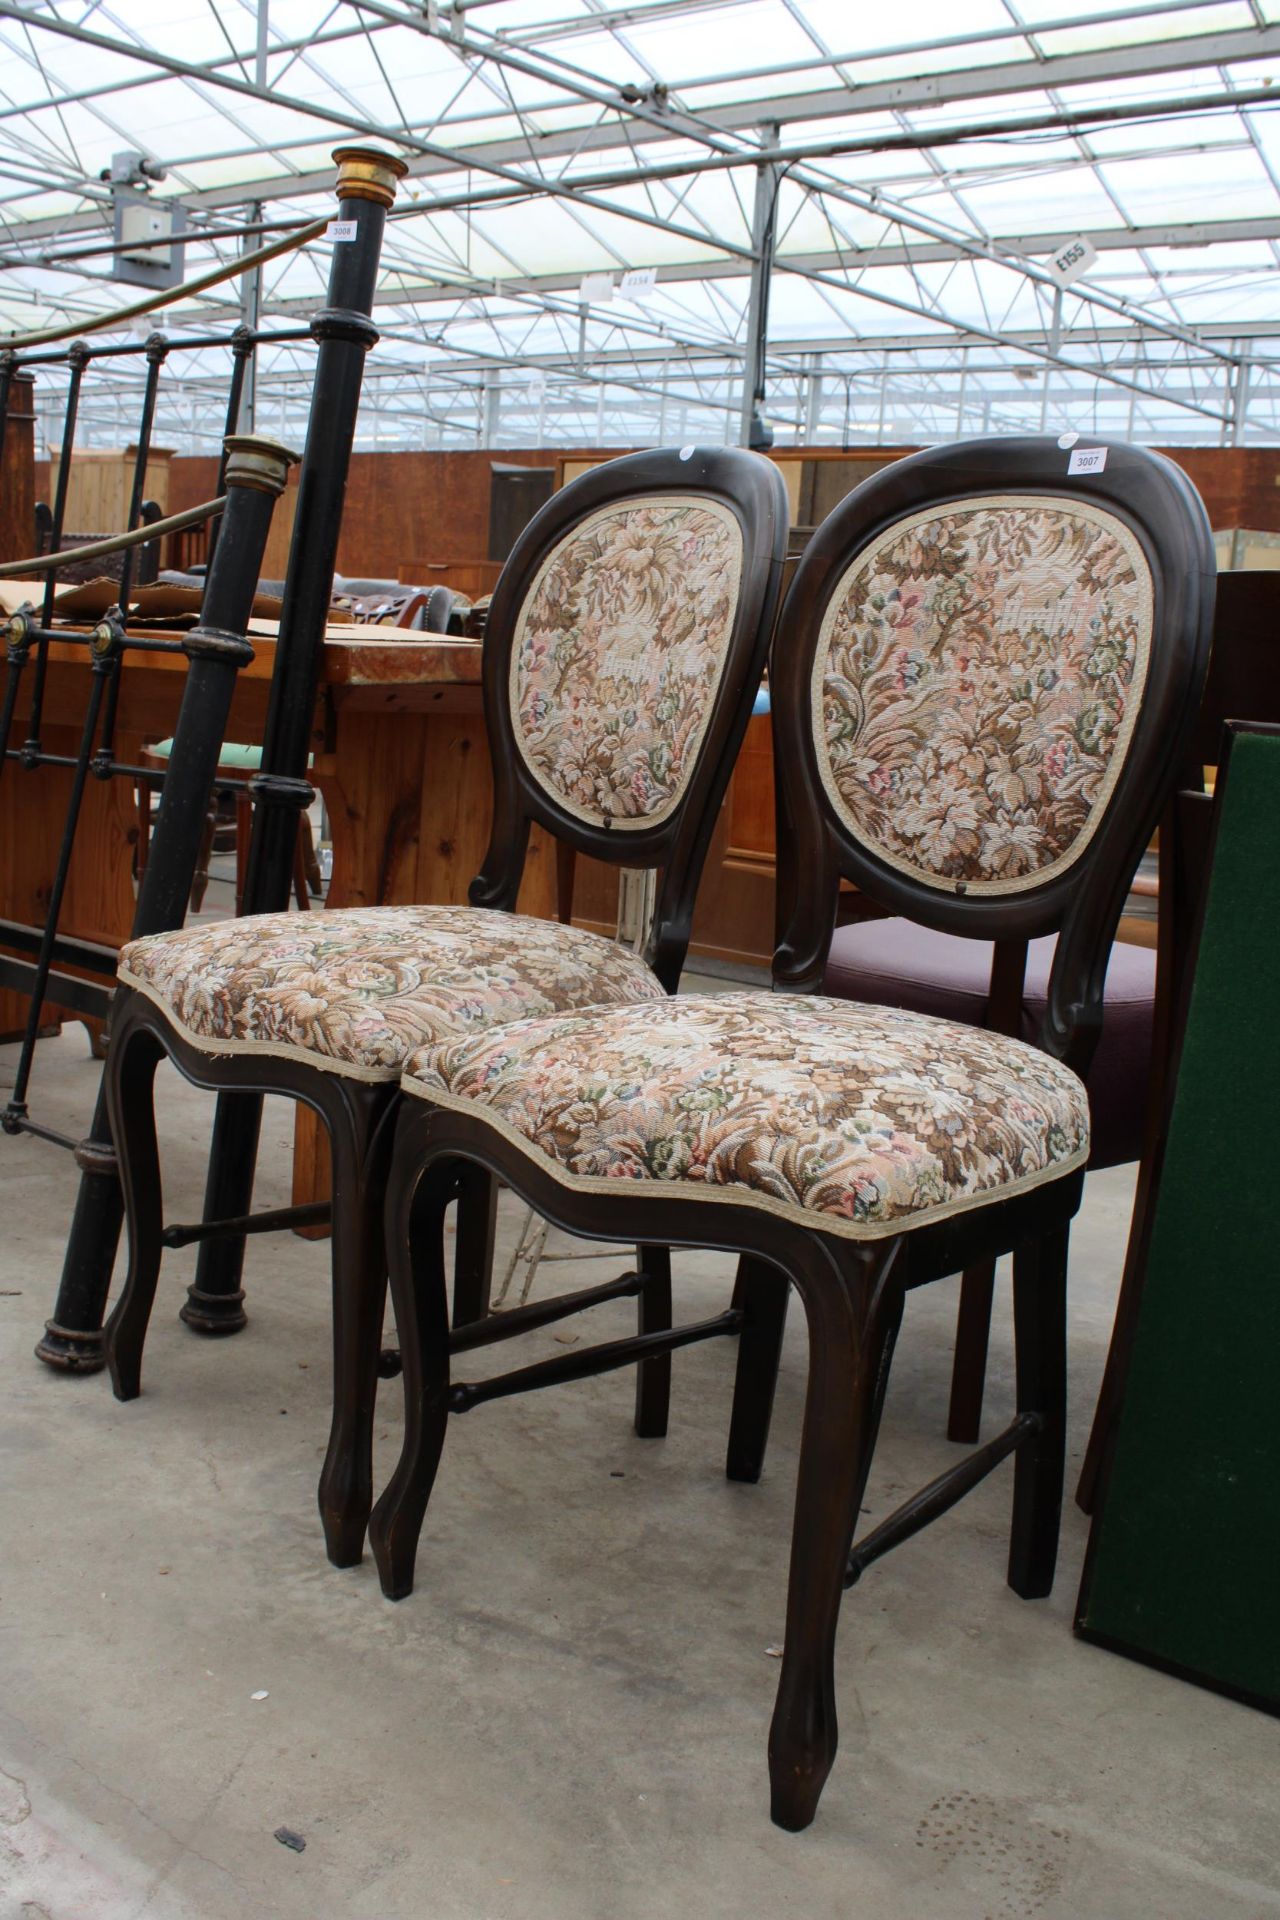 A PAIR OF VICTORIAN STYLE DINING CHAIRS - Image 2 of 2